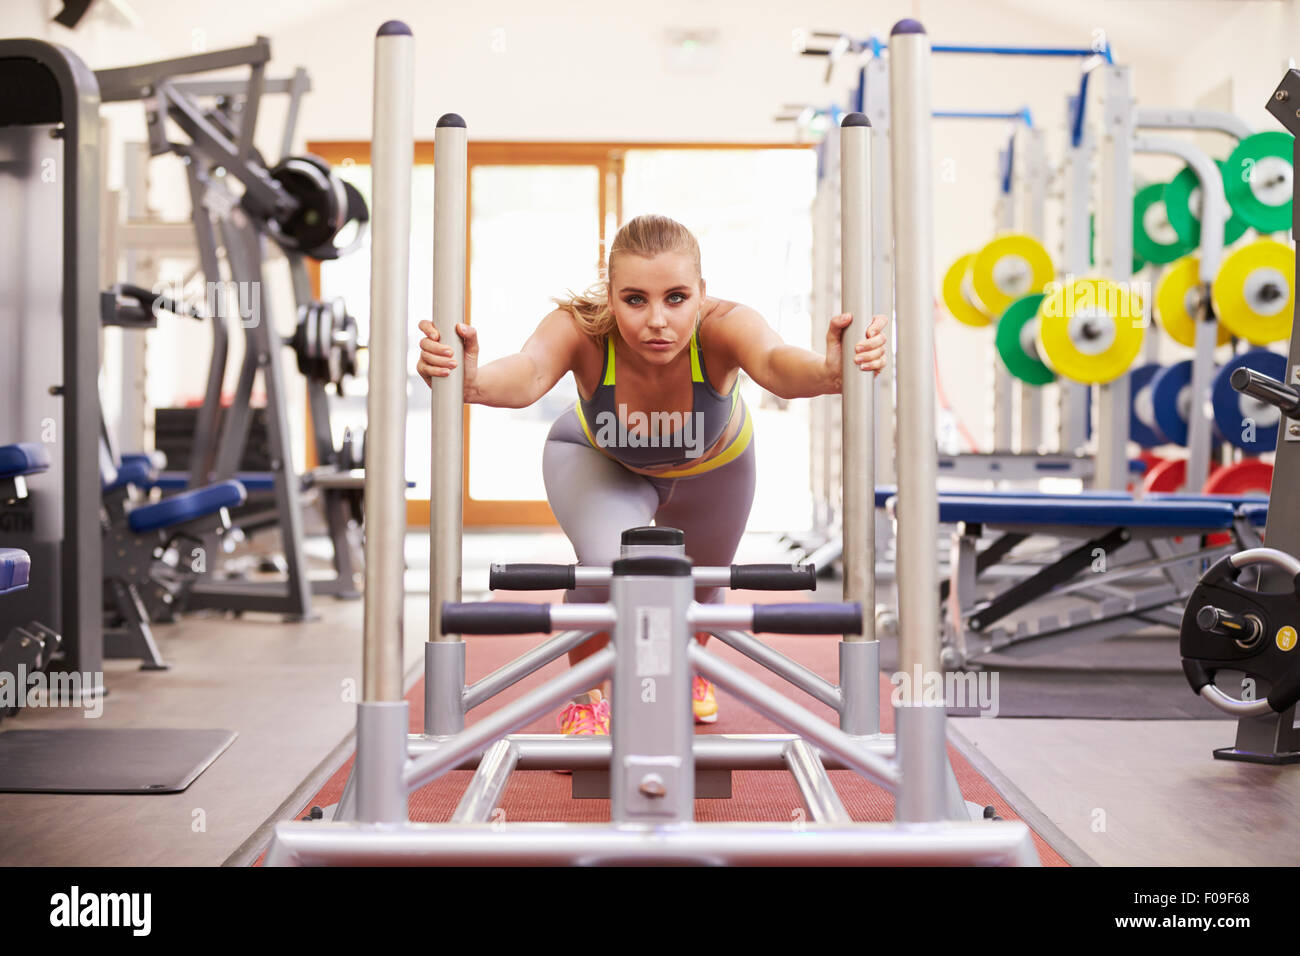 Woman working out using equipment at a gym Stock Photo